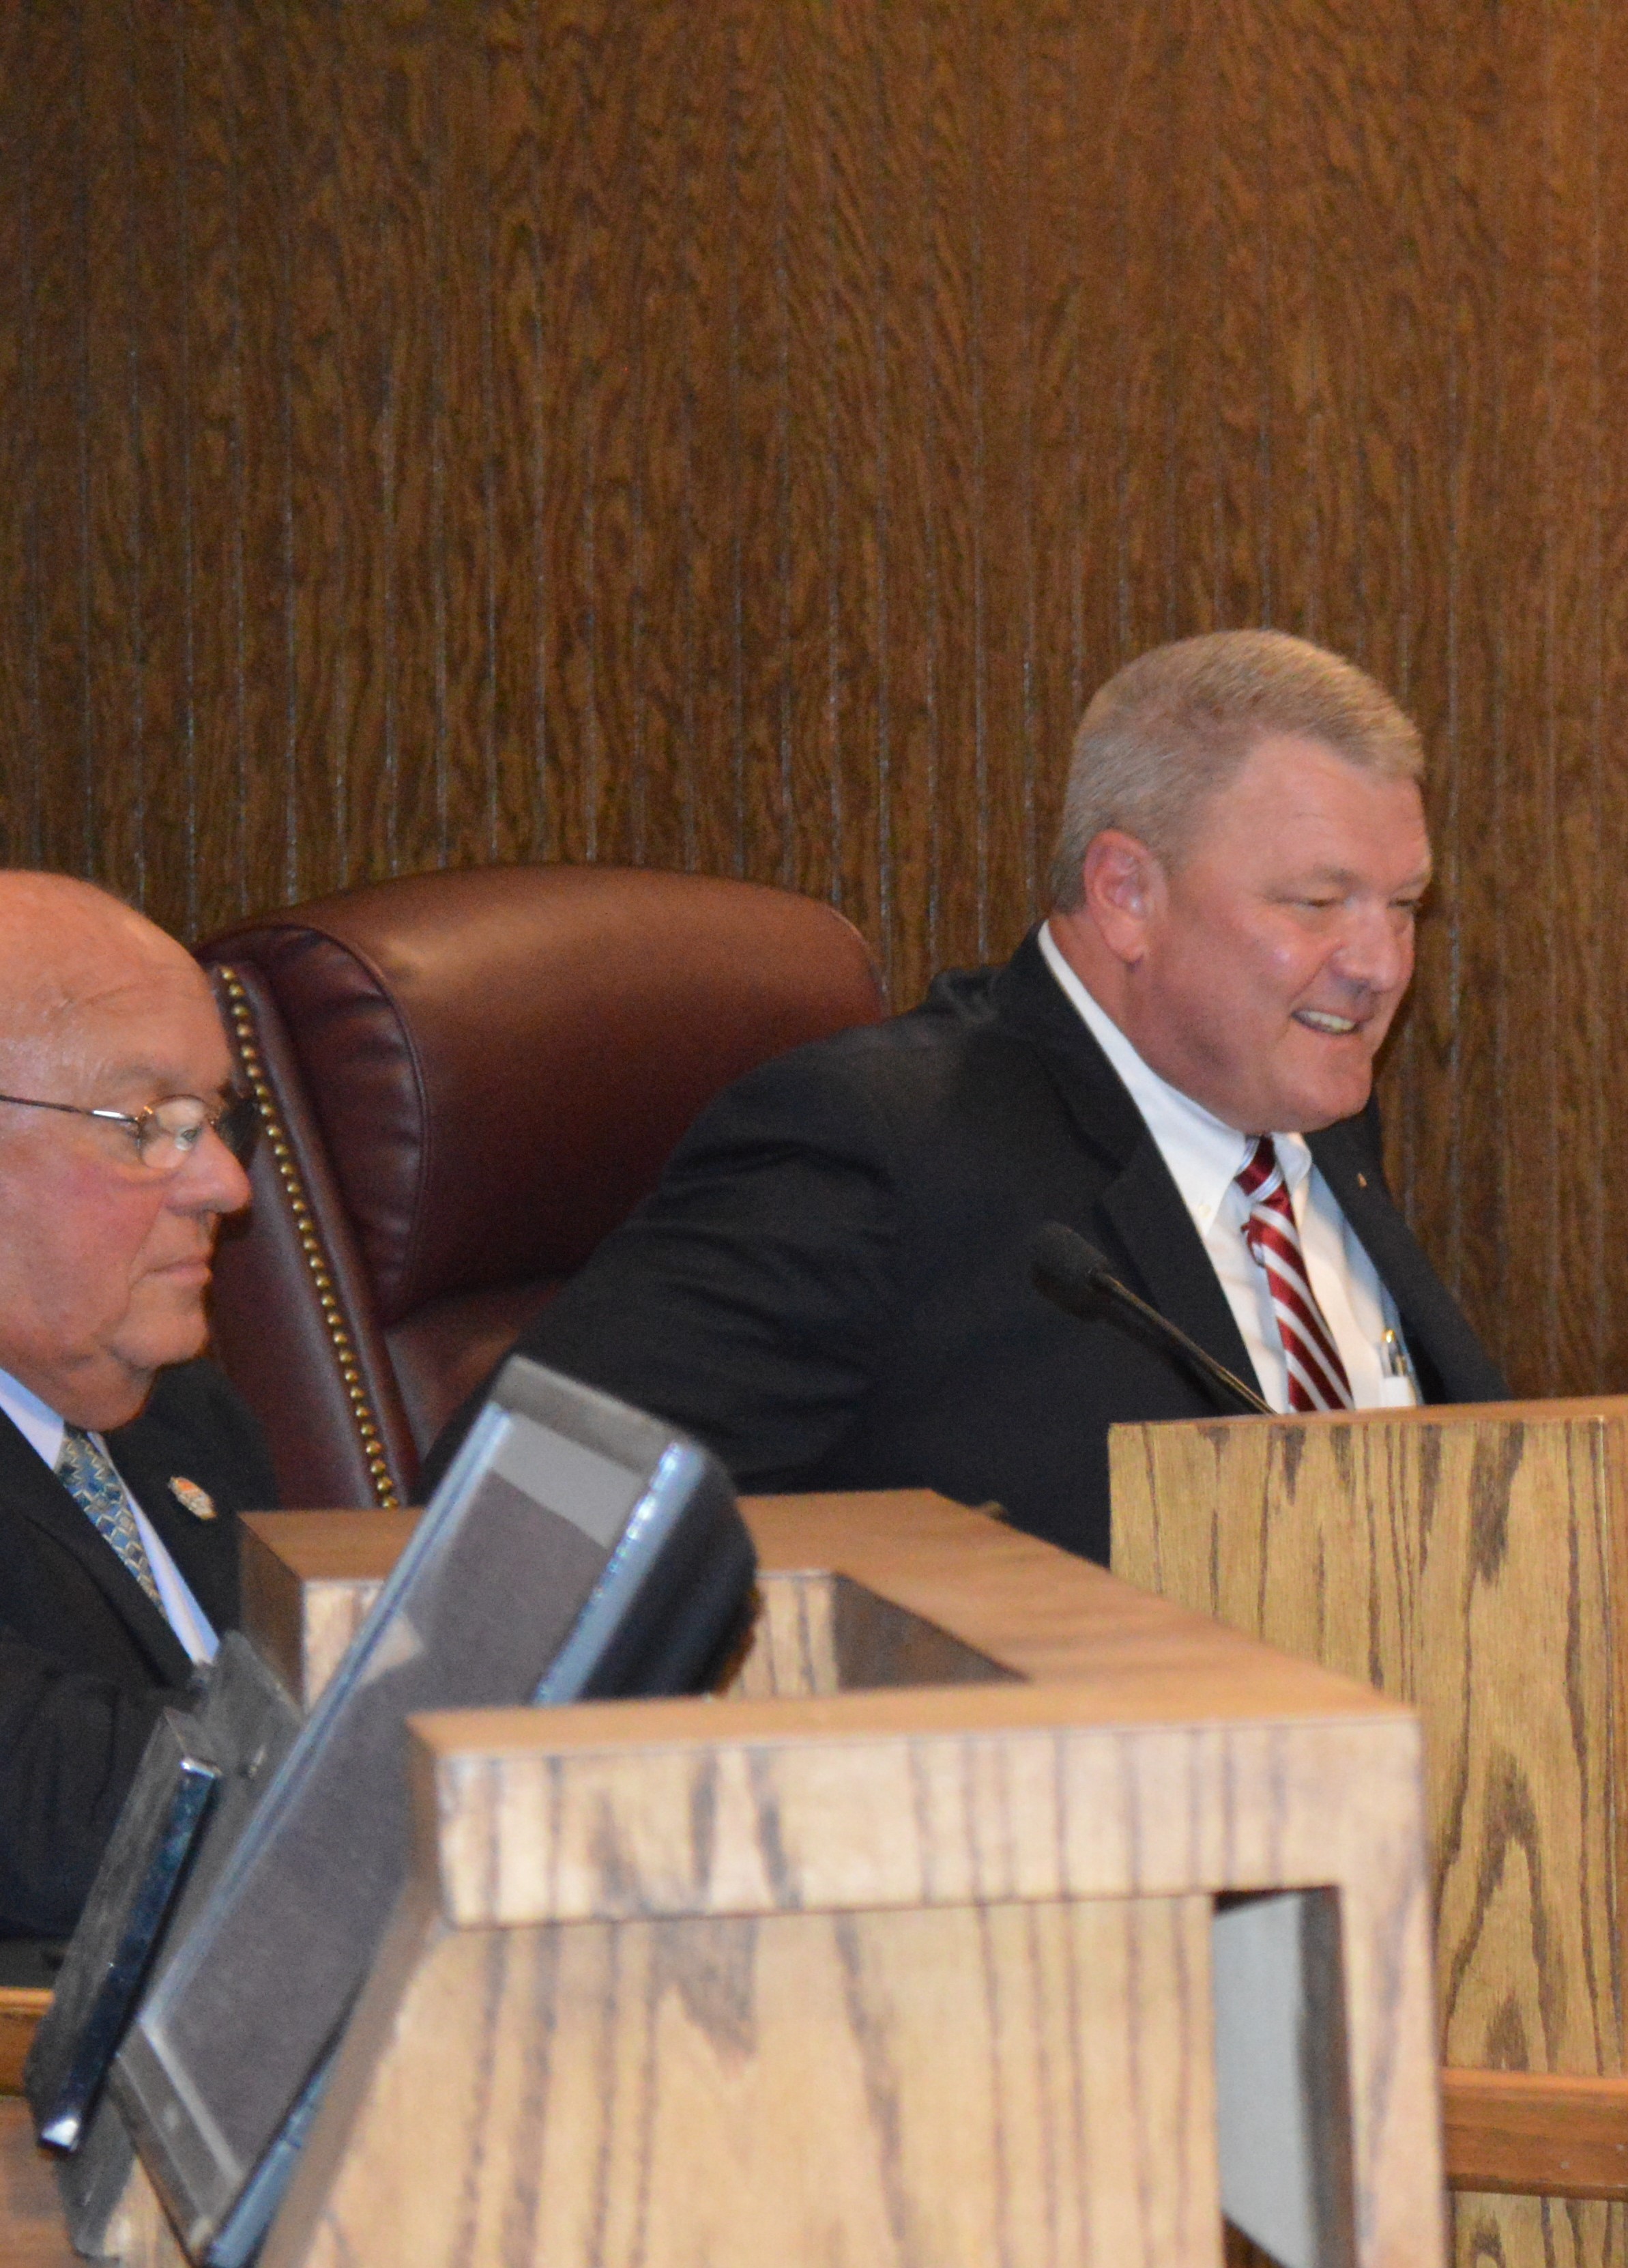 Resort Councilman Questioned Again On Social Media Comments